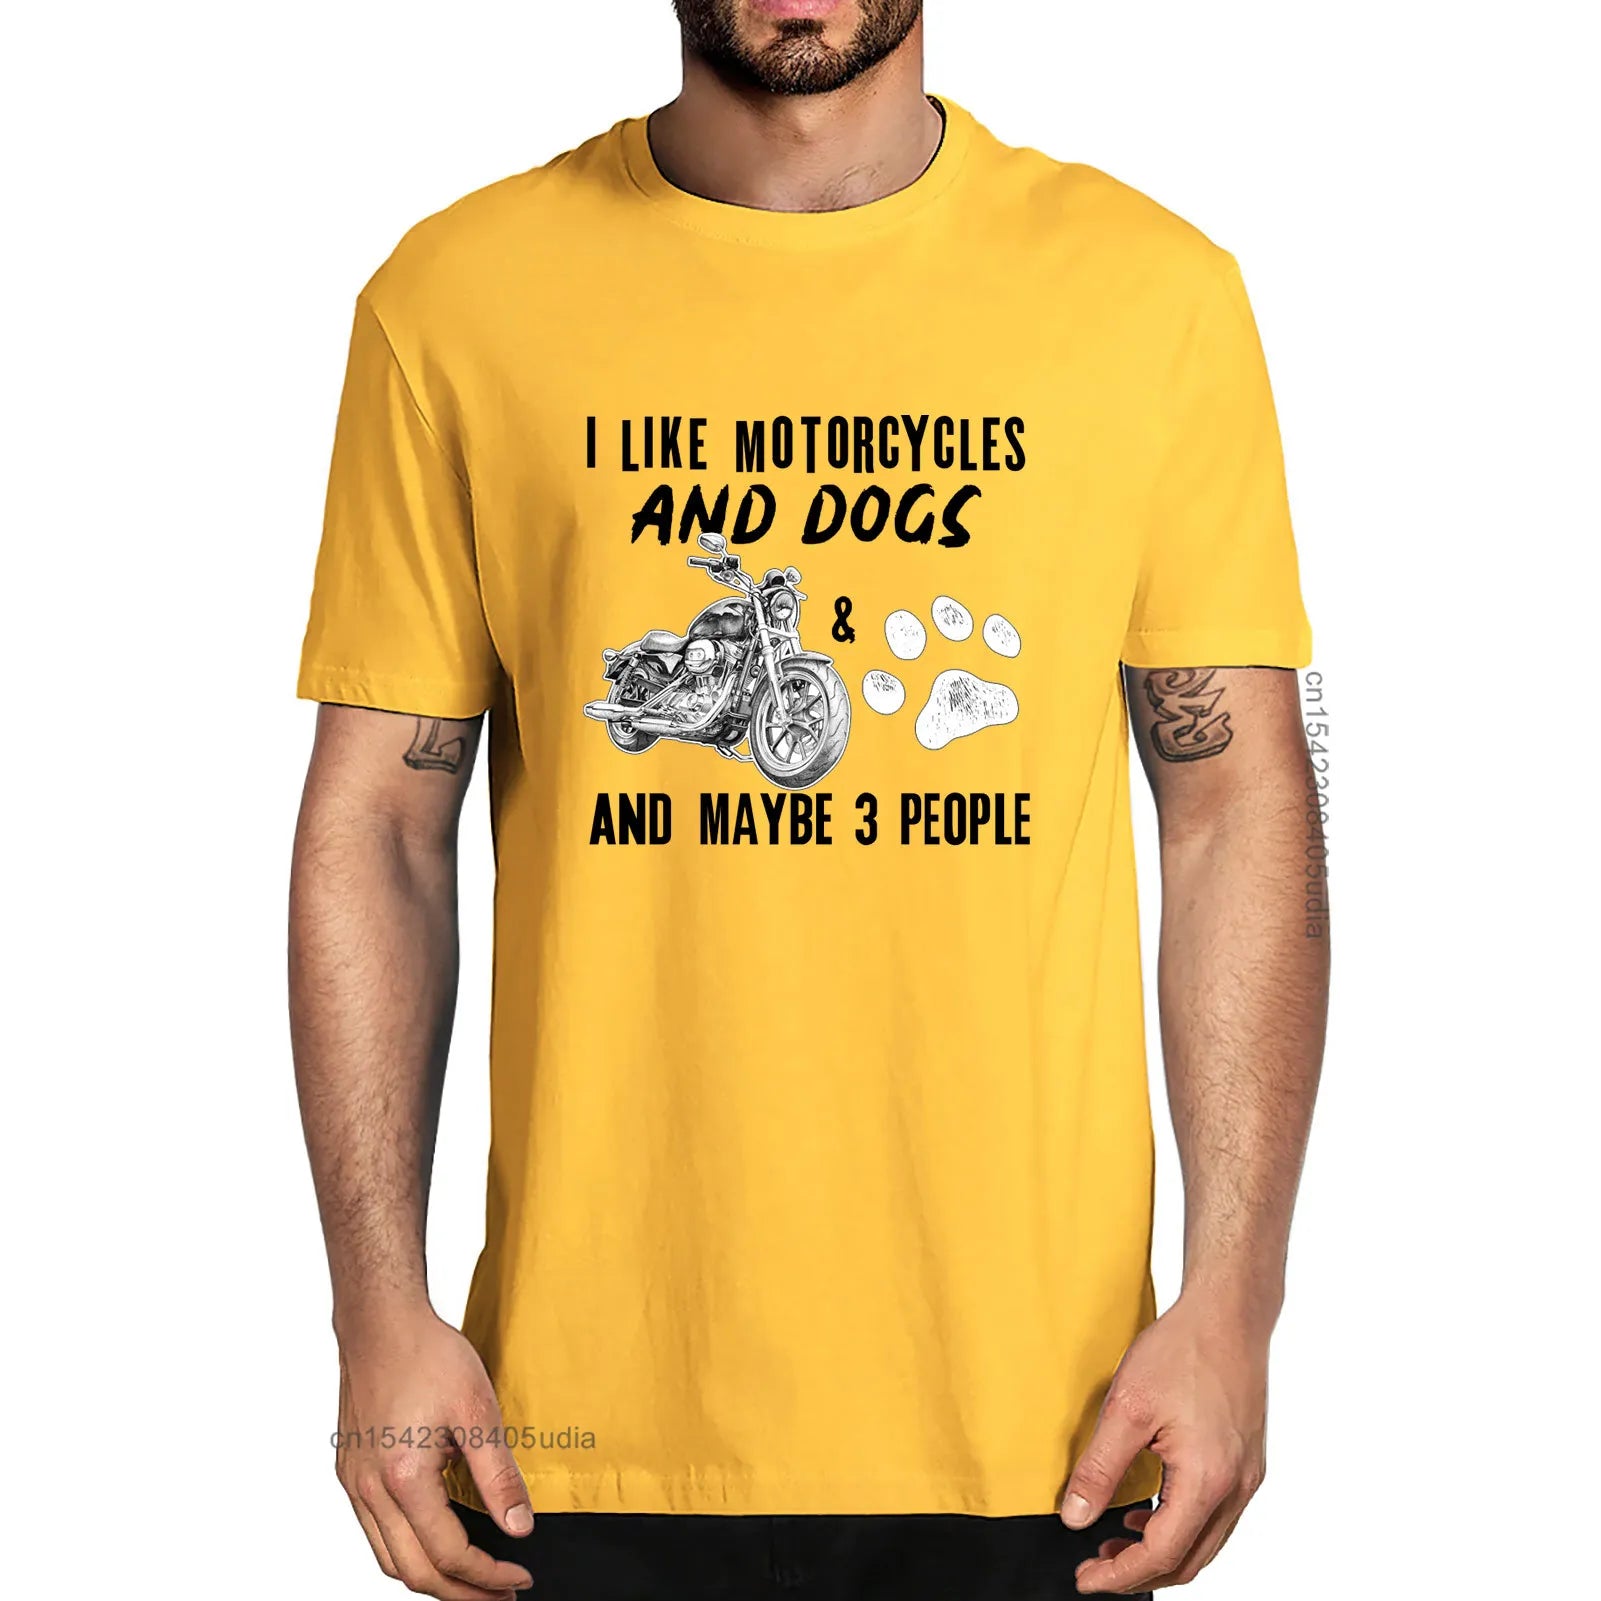 I Like Motorcycles And Dogs And Maybe 3 People Summer Men's 100% Cotton T-Shirts Funny Women Unisex Soft Top Tee - Lizard Vigilante